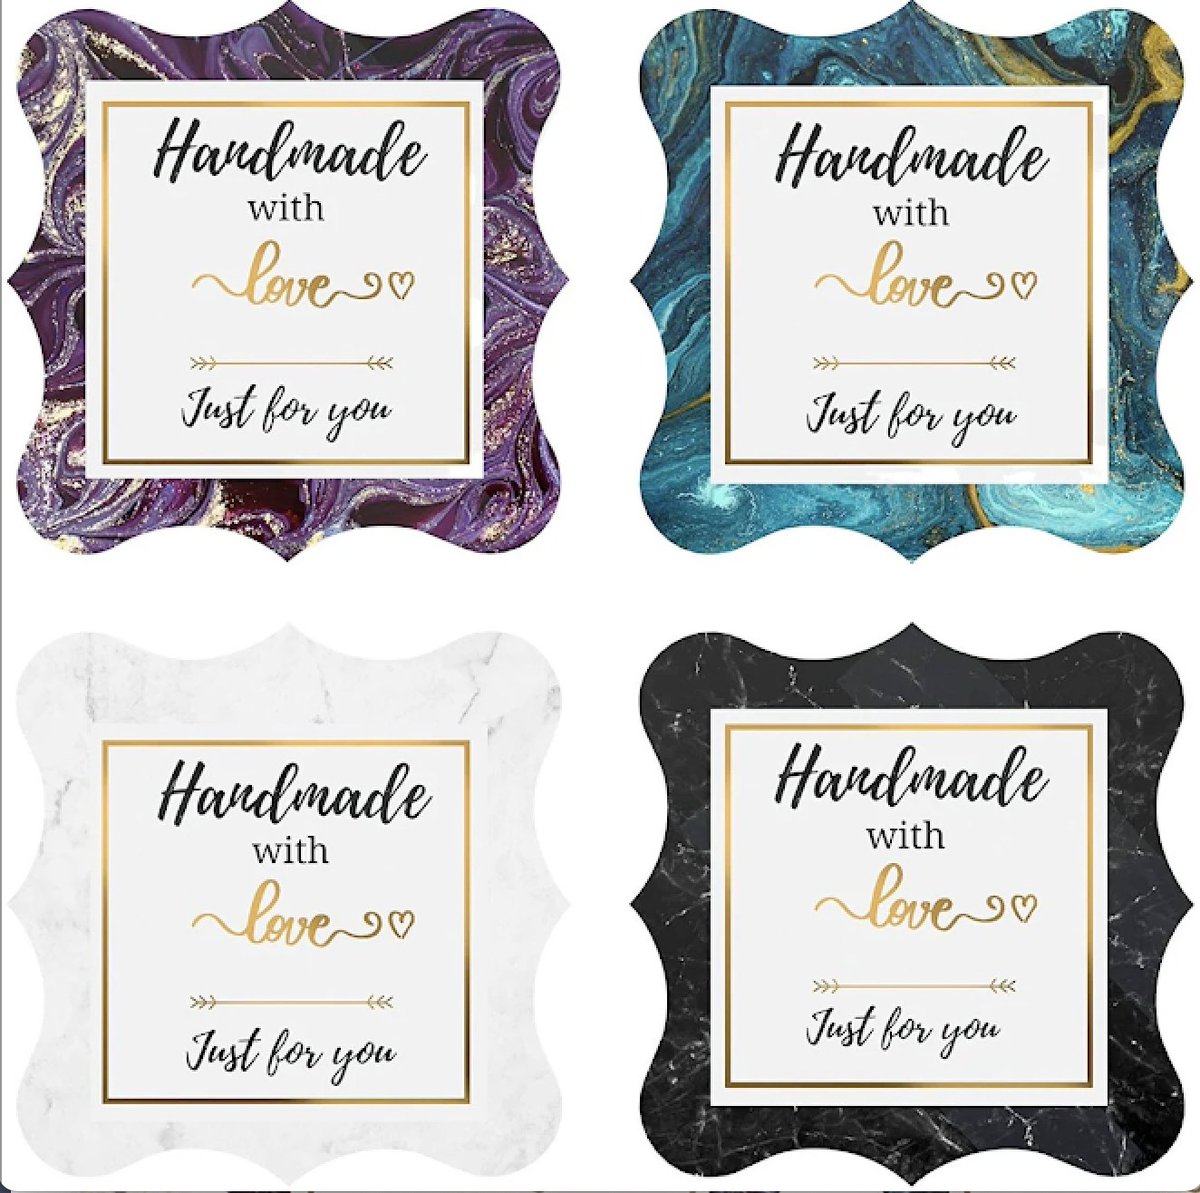 2' Handmade With Love Sticker - 4 Marbled Colors with Elegant Shape - Stickers For Business #DIMaxSupplies #handmadewithlovestickers #elegantmarbledspecialcutstickers #stickersforbusiness #shopsupply #businesssupply #crafsupply  etsy.me/3G5euI2